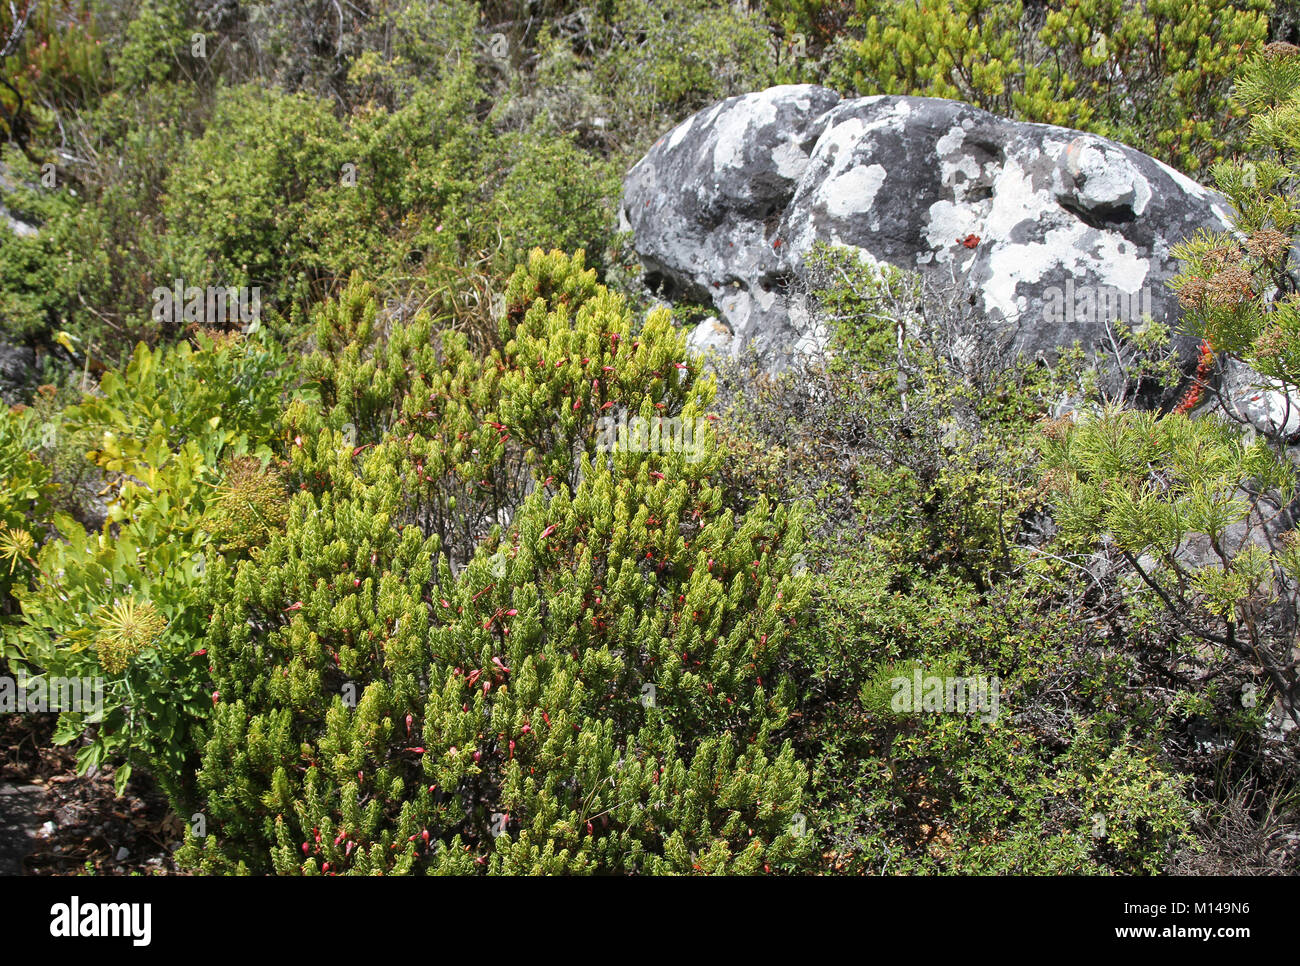 Erica plukenetii Heather, Fynbos and other flowering plants around a rock on a Table Mountain hiking trail, Cape Town, Western Cape, South Africa. Stock Photo